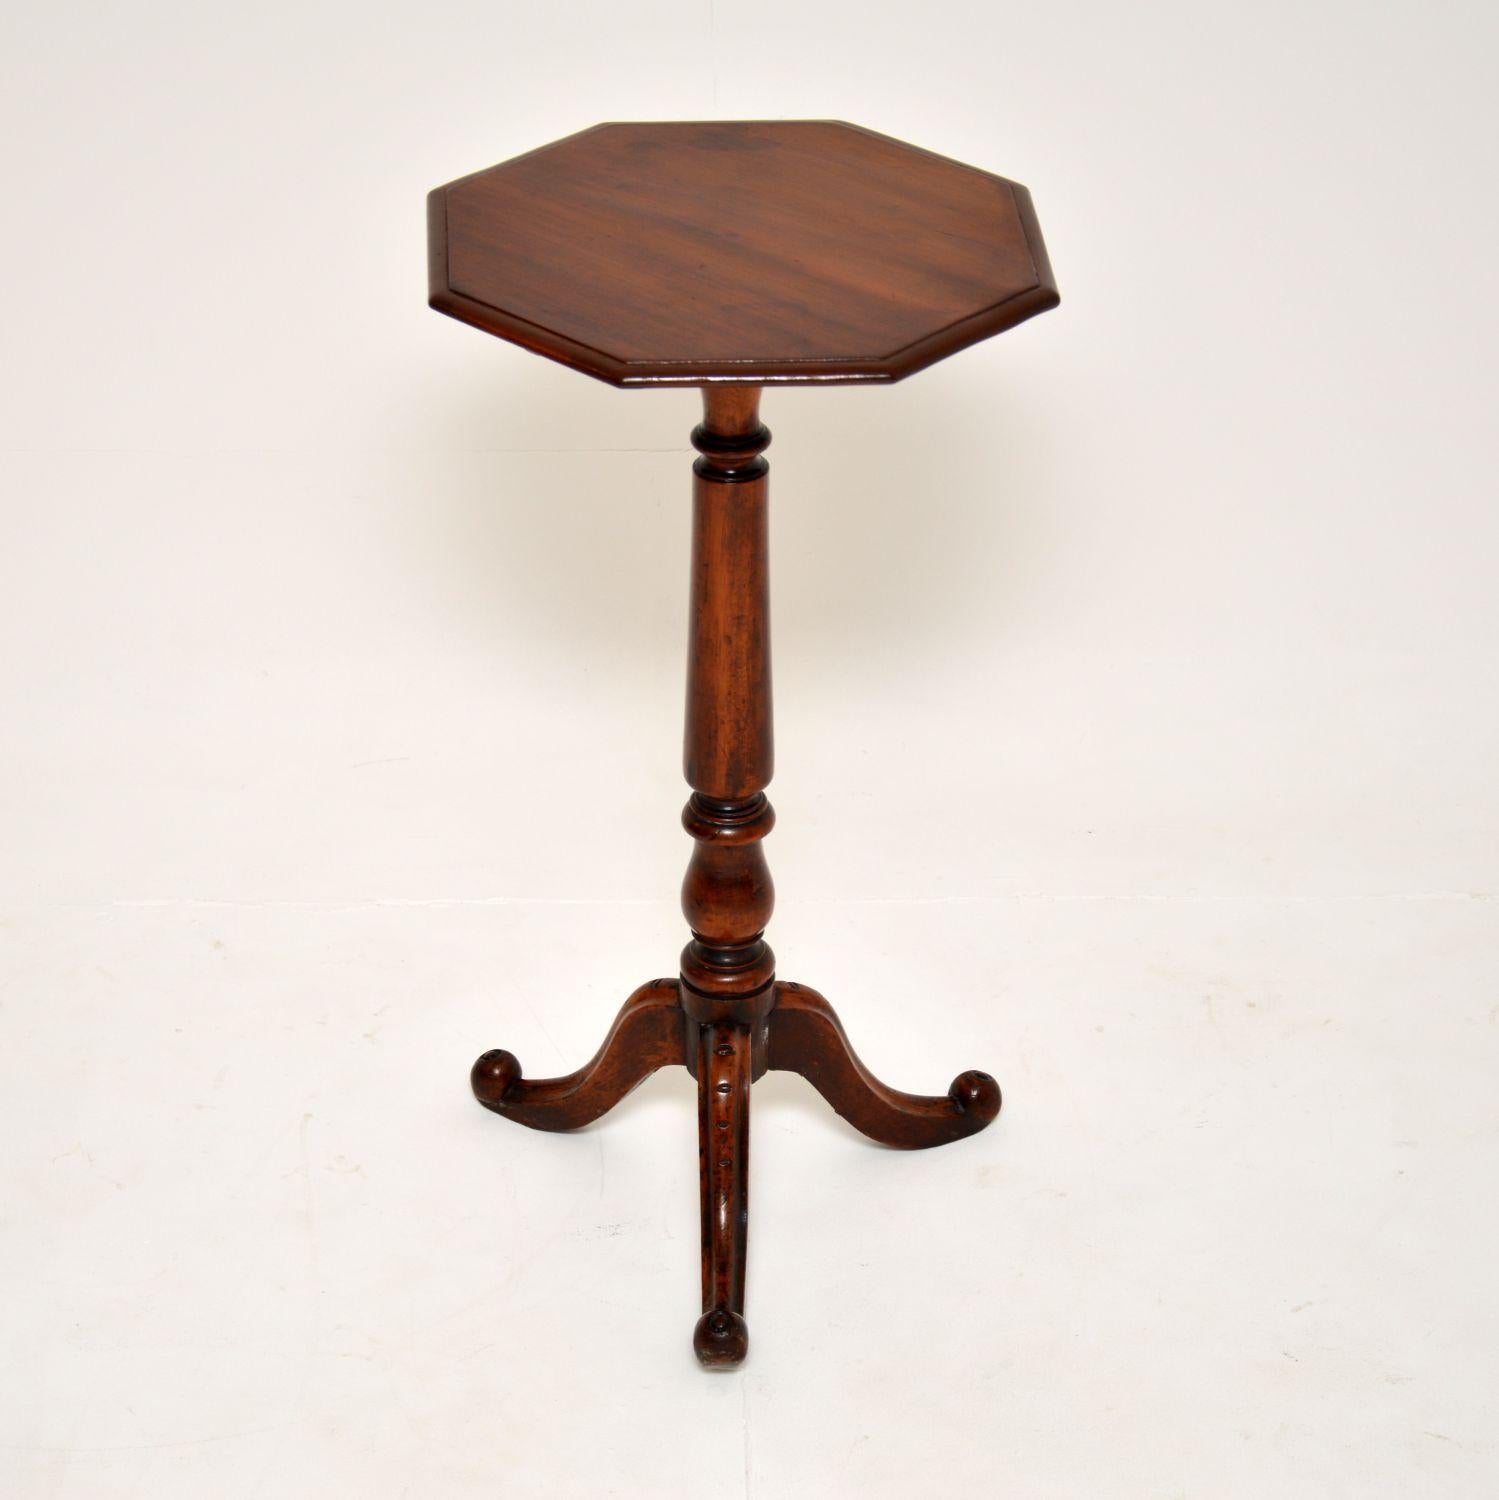 A wonderful original antique side table. This was made in England, it dates from around the 1840-1860 period.

It is of fantastic quality and has a lovely design. It is fairly tall, standing on a beautifully turned baluster column and tripod base,